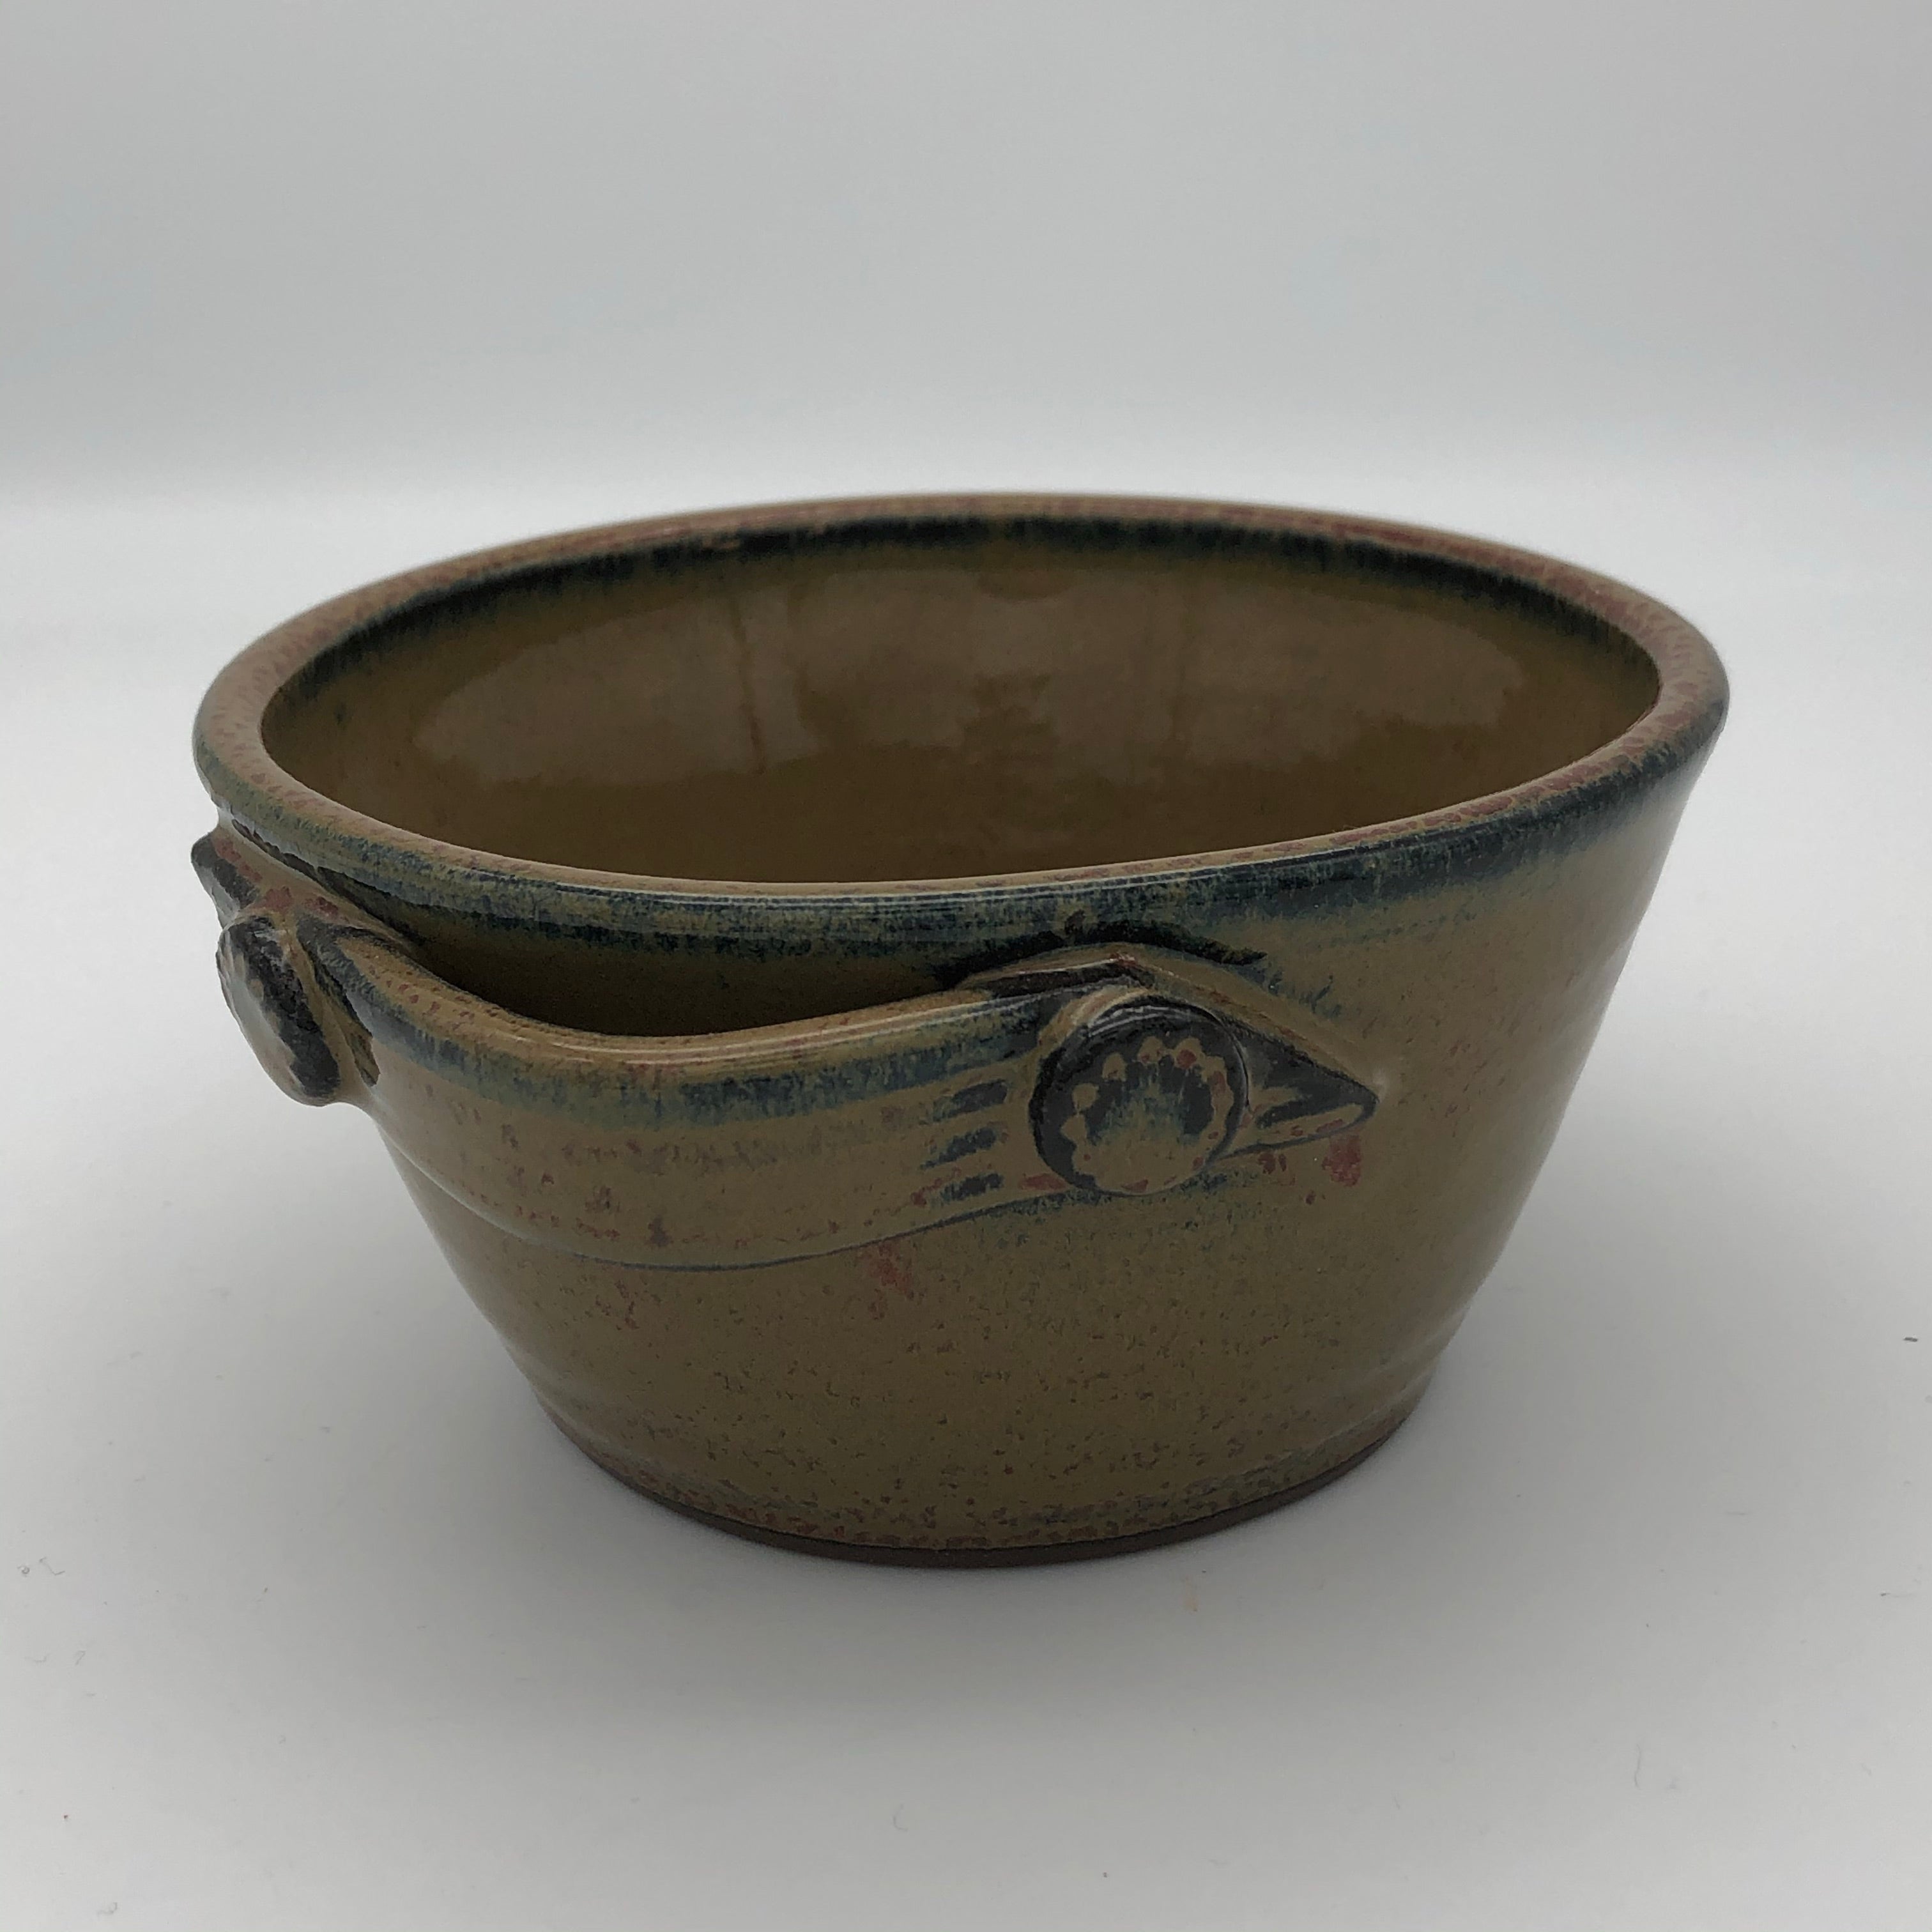 Small bowl with handles in Cola Green